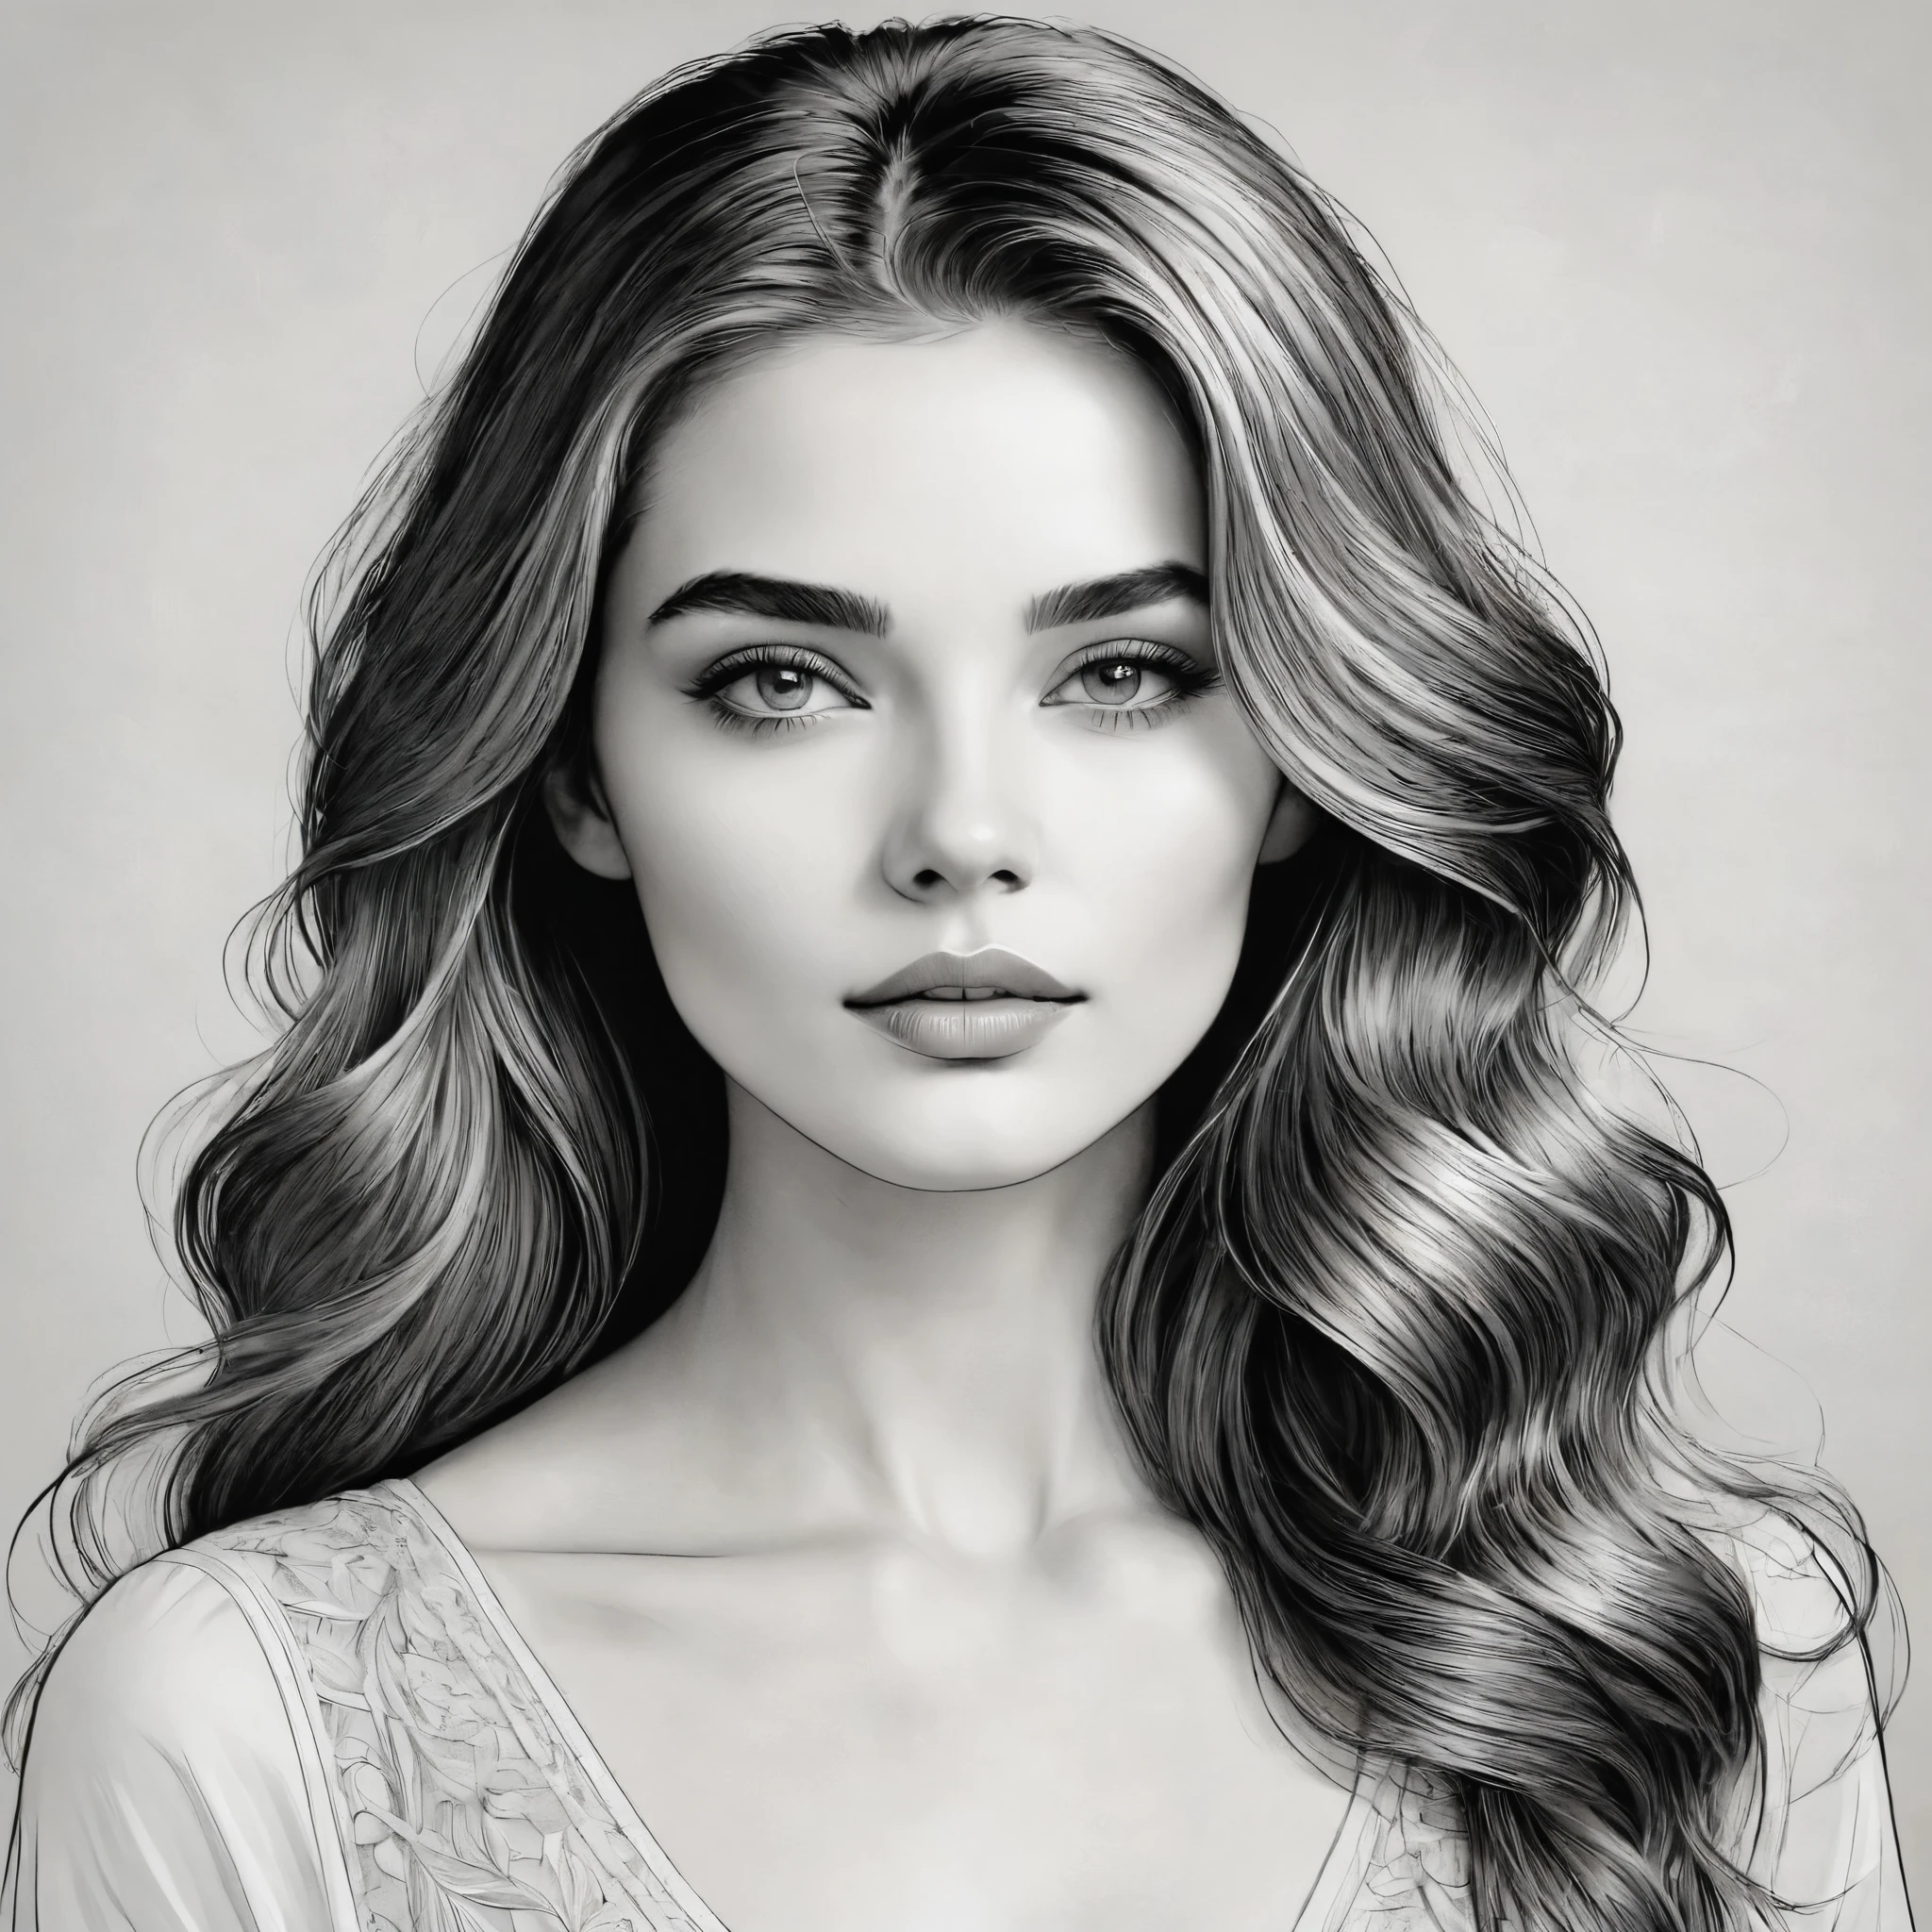 a line art portrait of a young woman, detailed facial features, beautiful eyes, delicate lips, long flowing hair, soft shadows, minimalist style, black and white, high contrast, intricate linework, elegant, serene, detailed, intricate, masterpiece